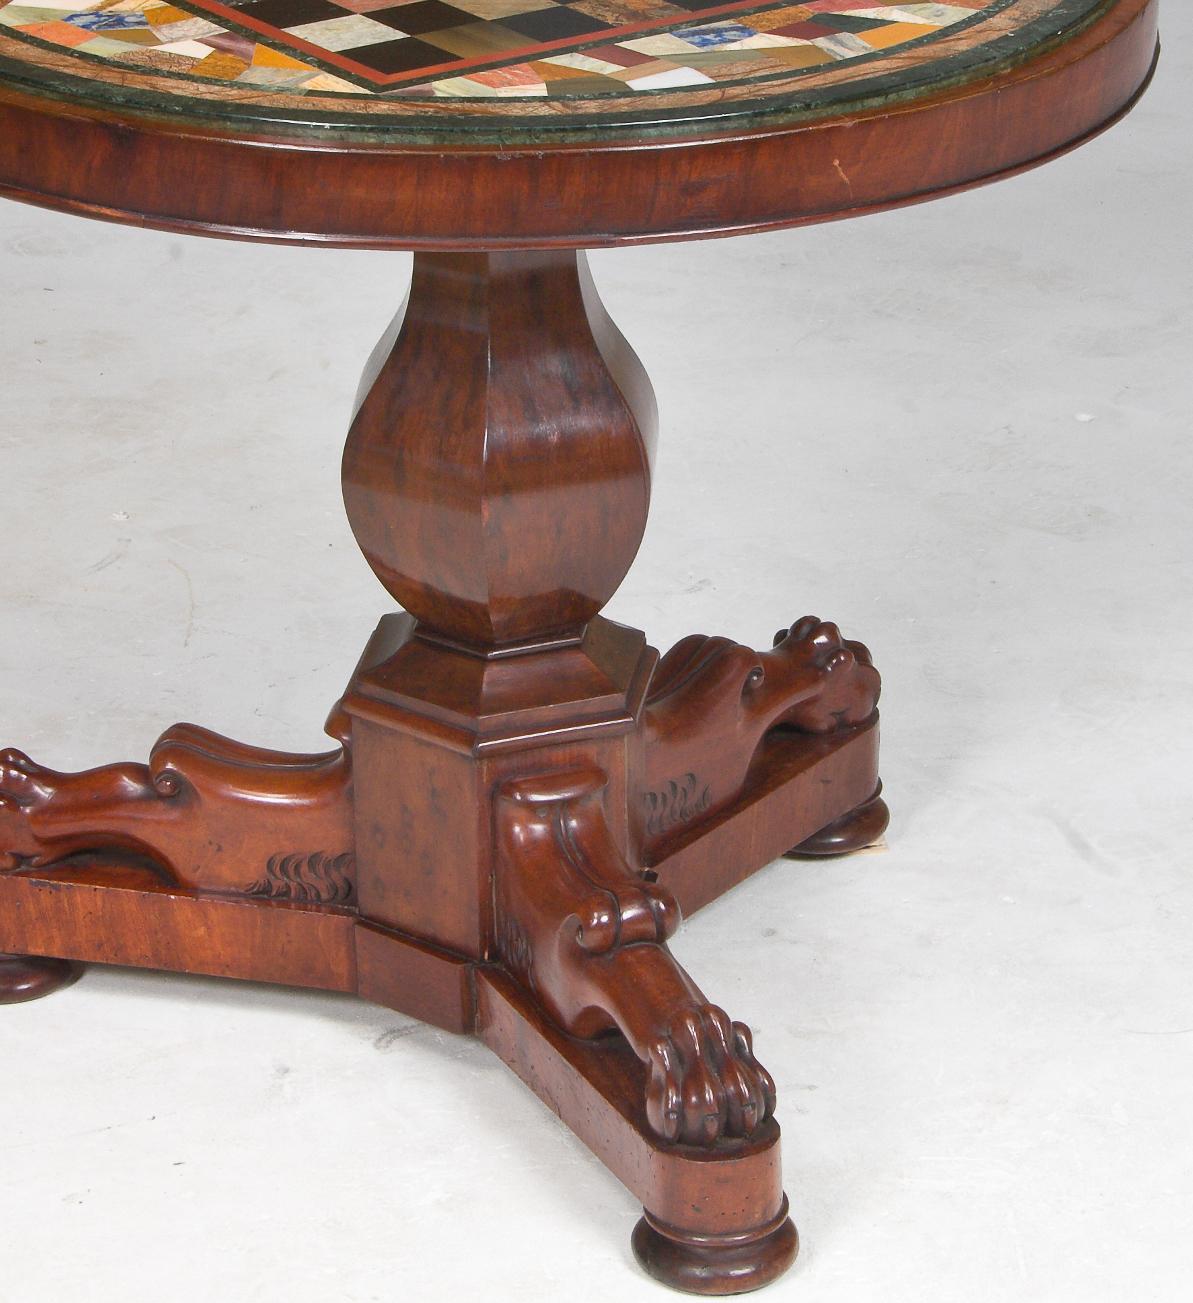 A late Victorian pedestal center table with a later inset specimen marble top
with the center a chess table.
circa 1890
Measures: Height 28 in
Diameter 31 in.